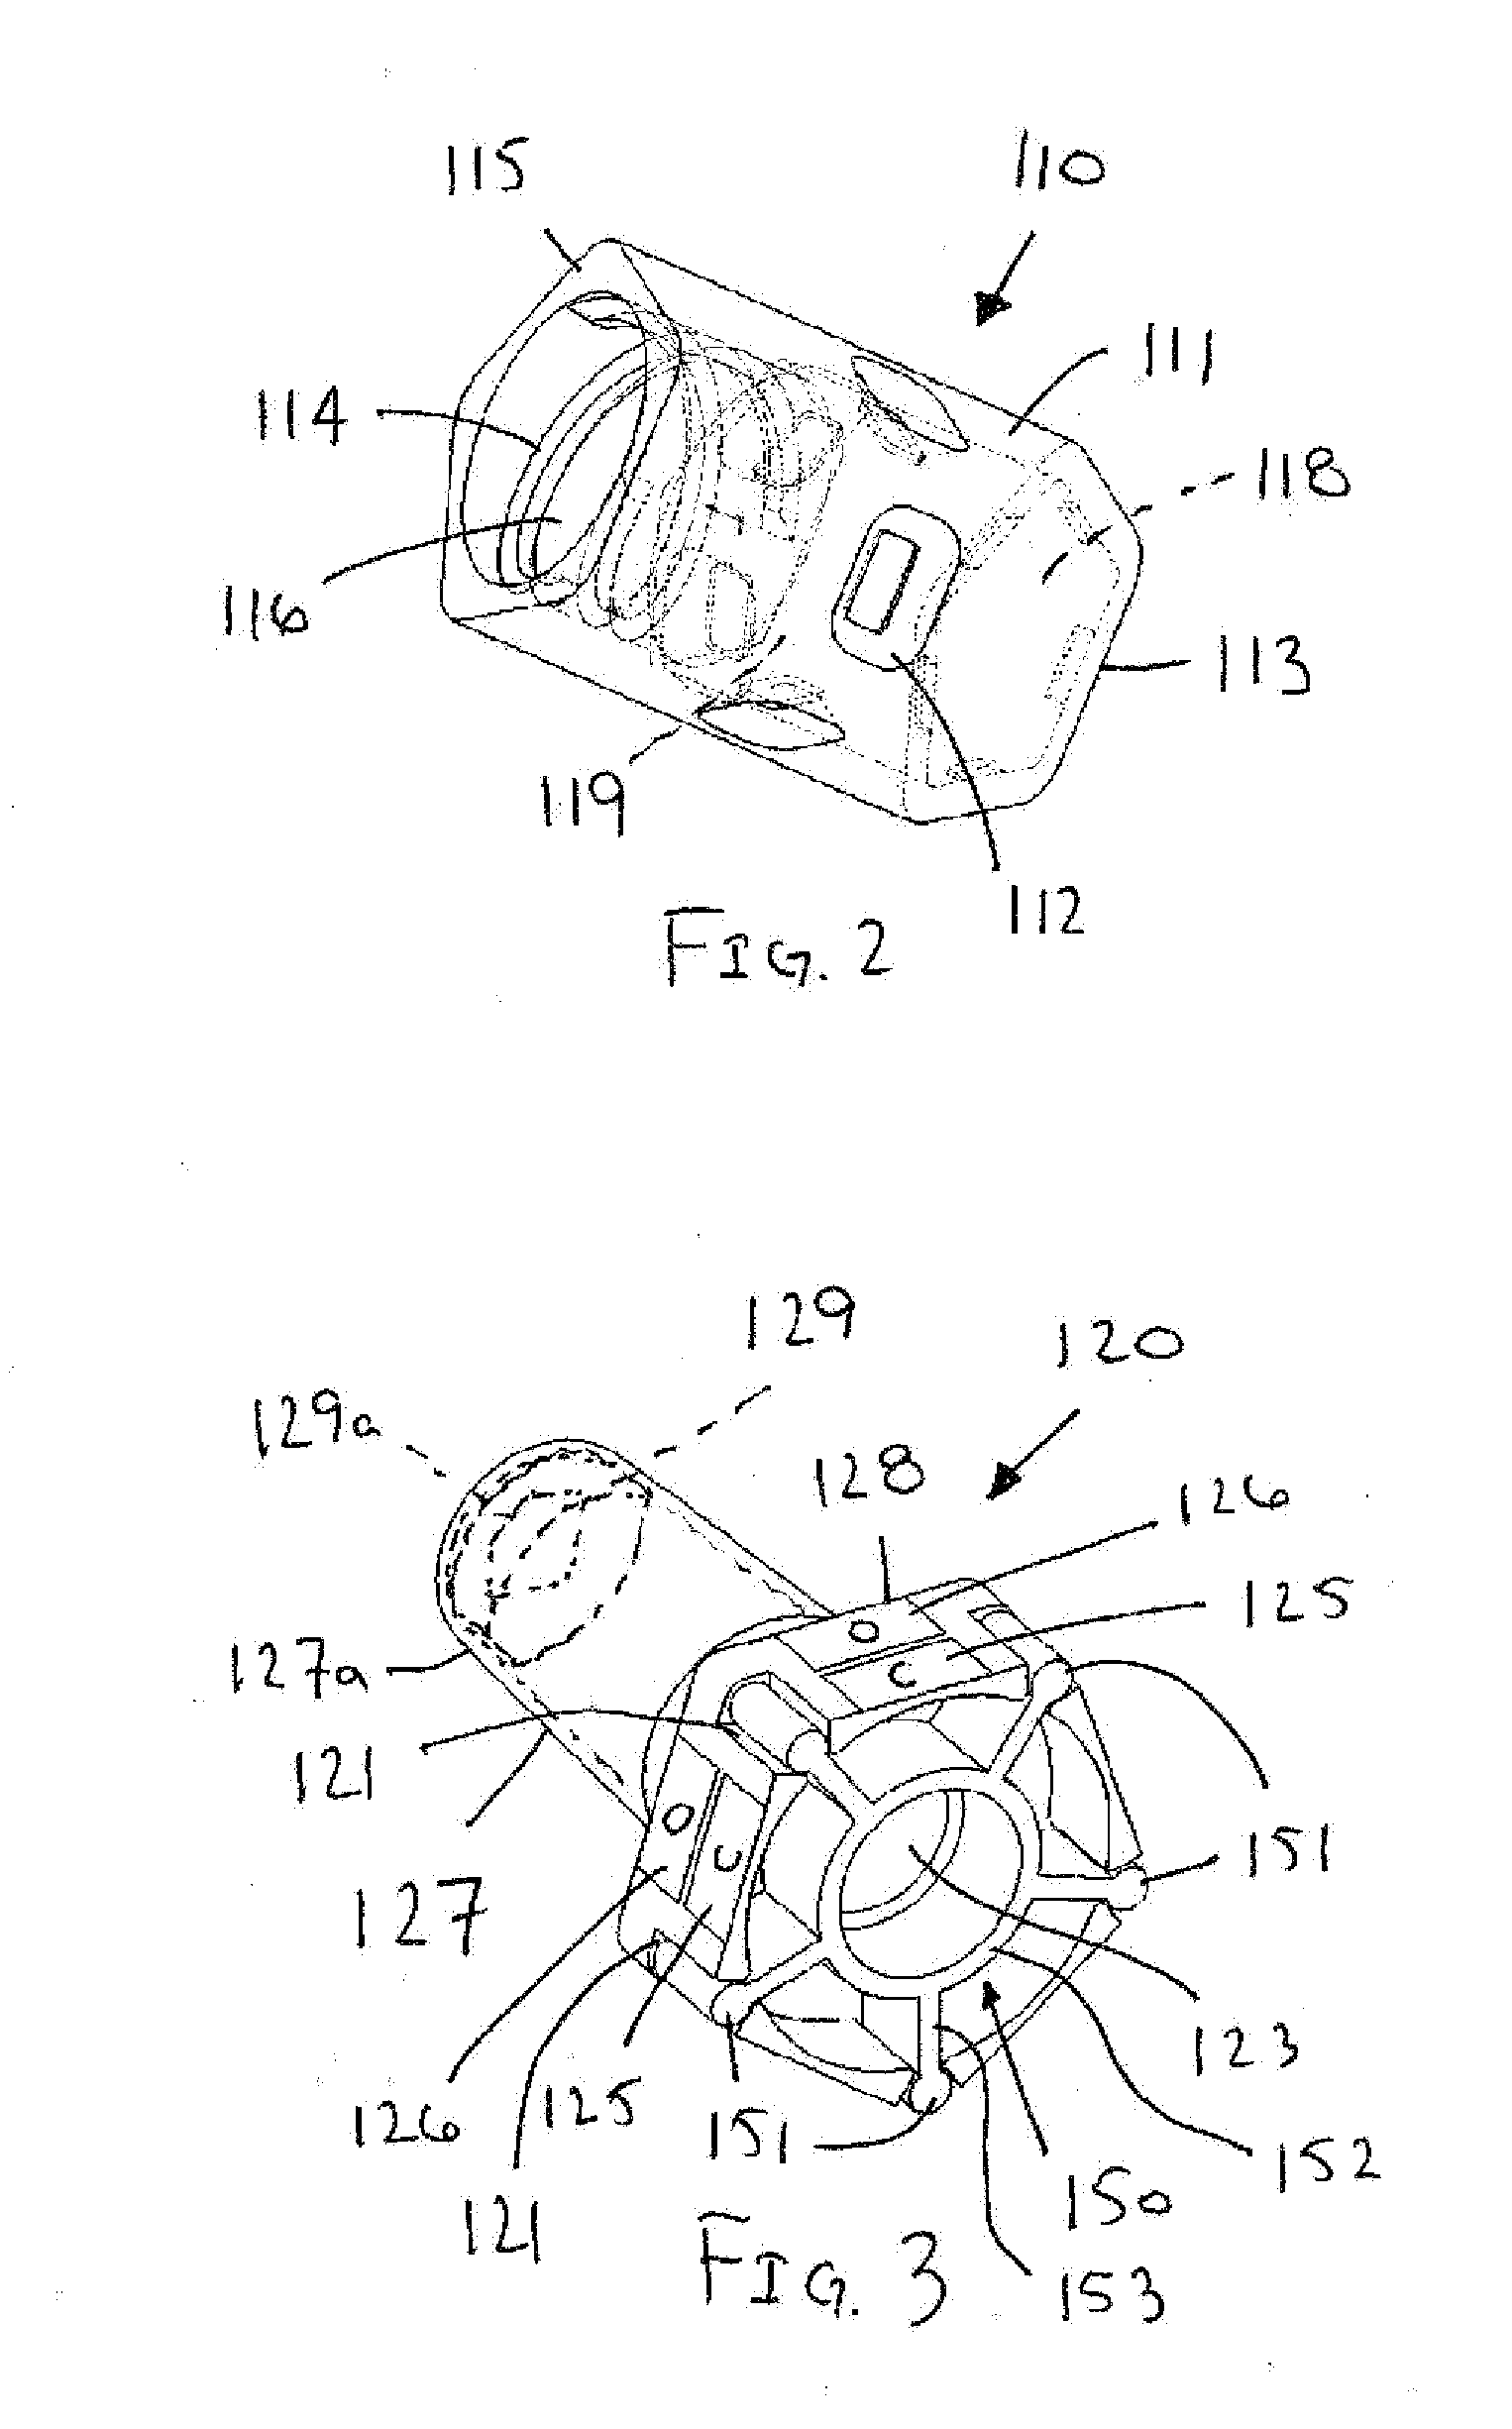 Devices, assemblies, and methods for controlling fluid flow